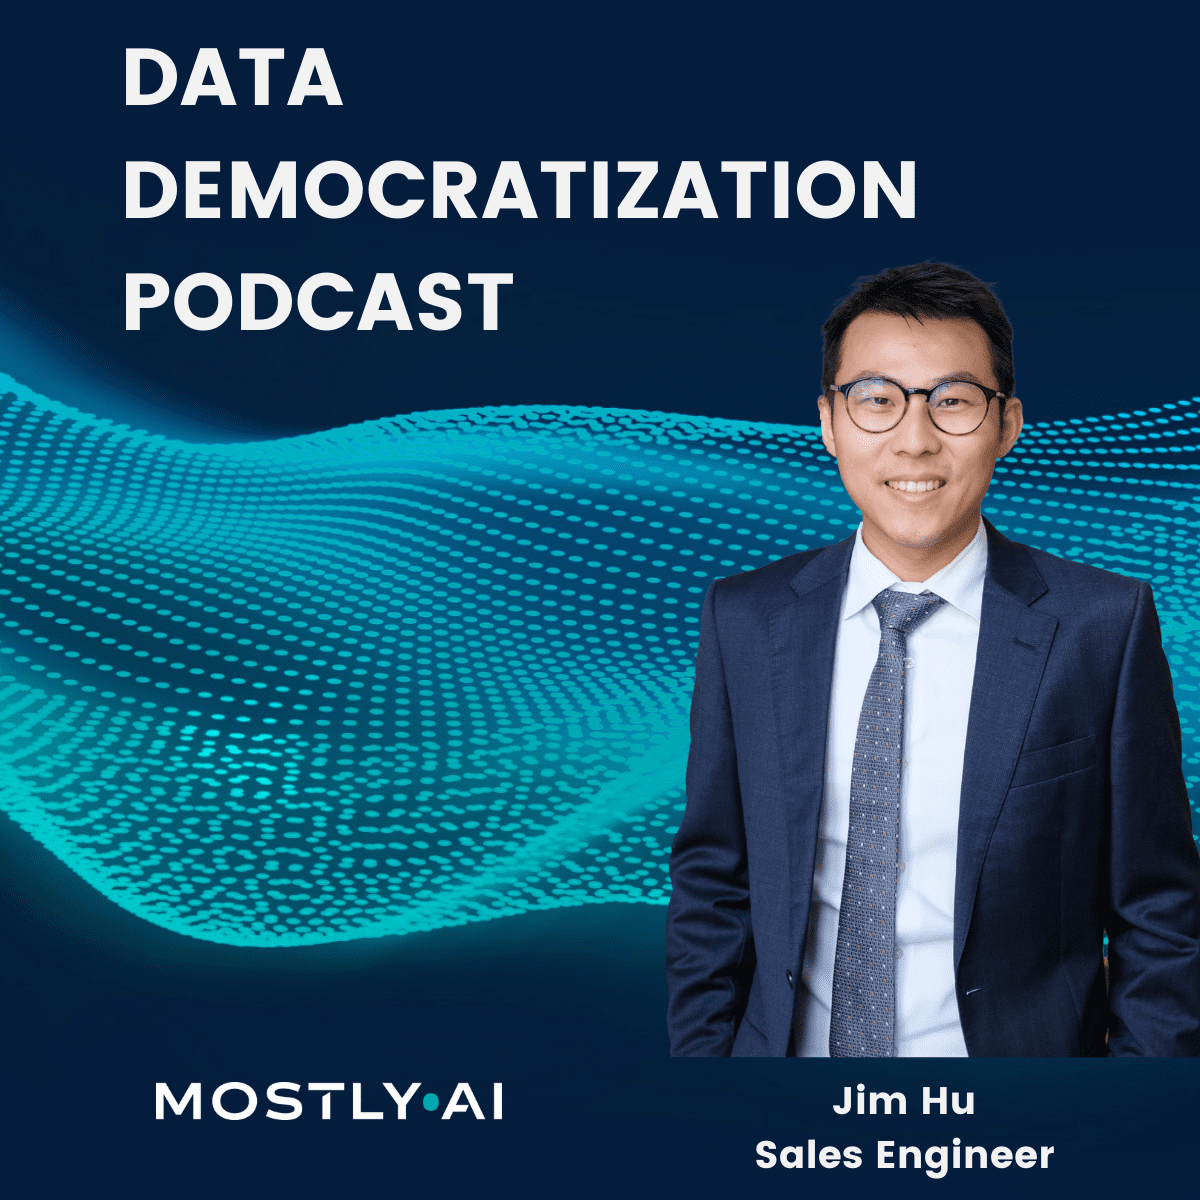 data democratization podcast about machine learning, artificial intelligence, cybersecurity, data protection and synthetic data